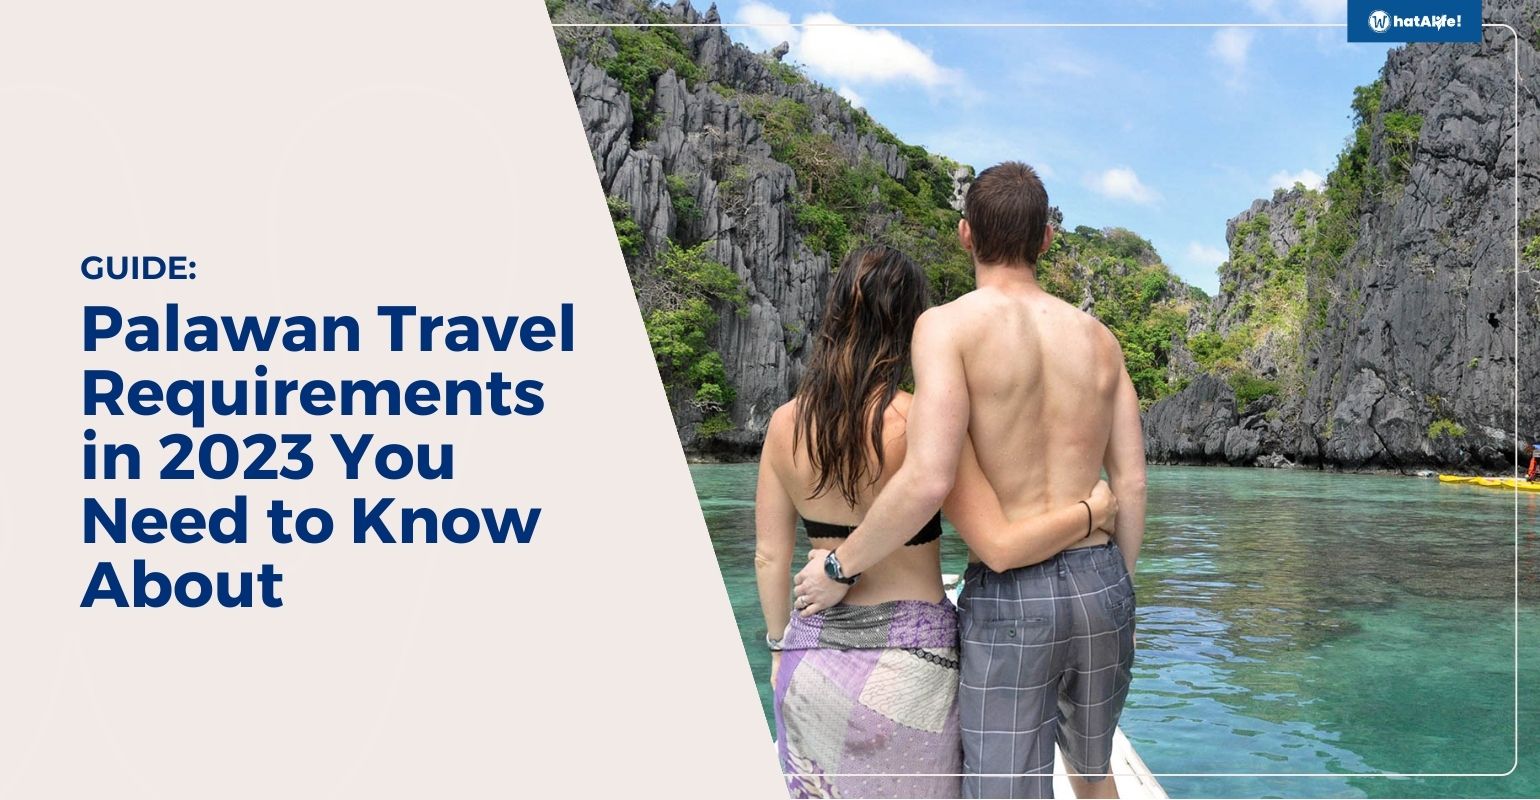 guide palawan travel requirements in 2023 you need to know about 1